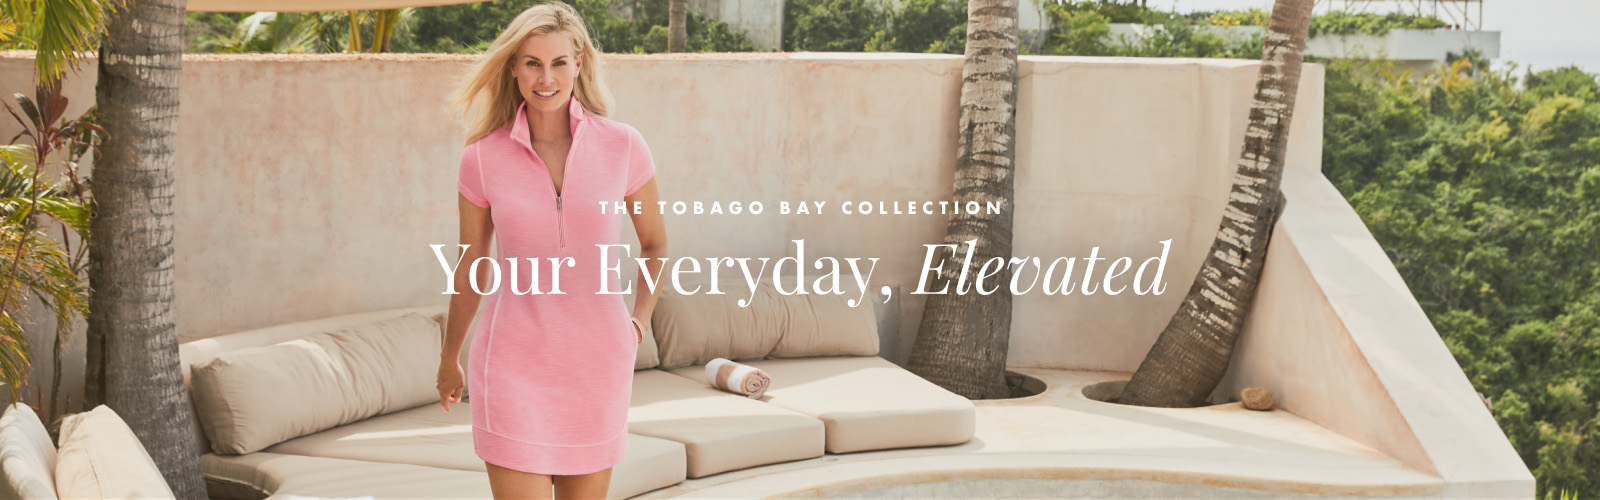 The Tobago Bay Collection - Your Everyday, Elevated